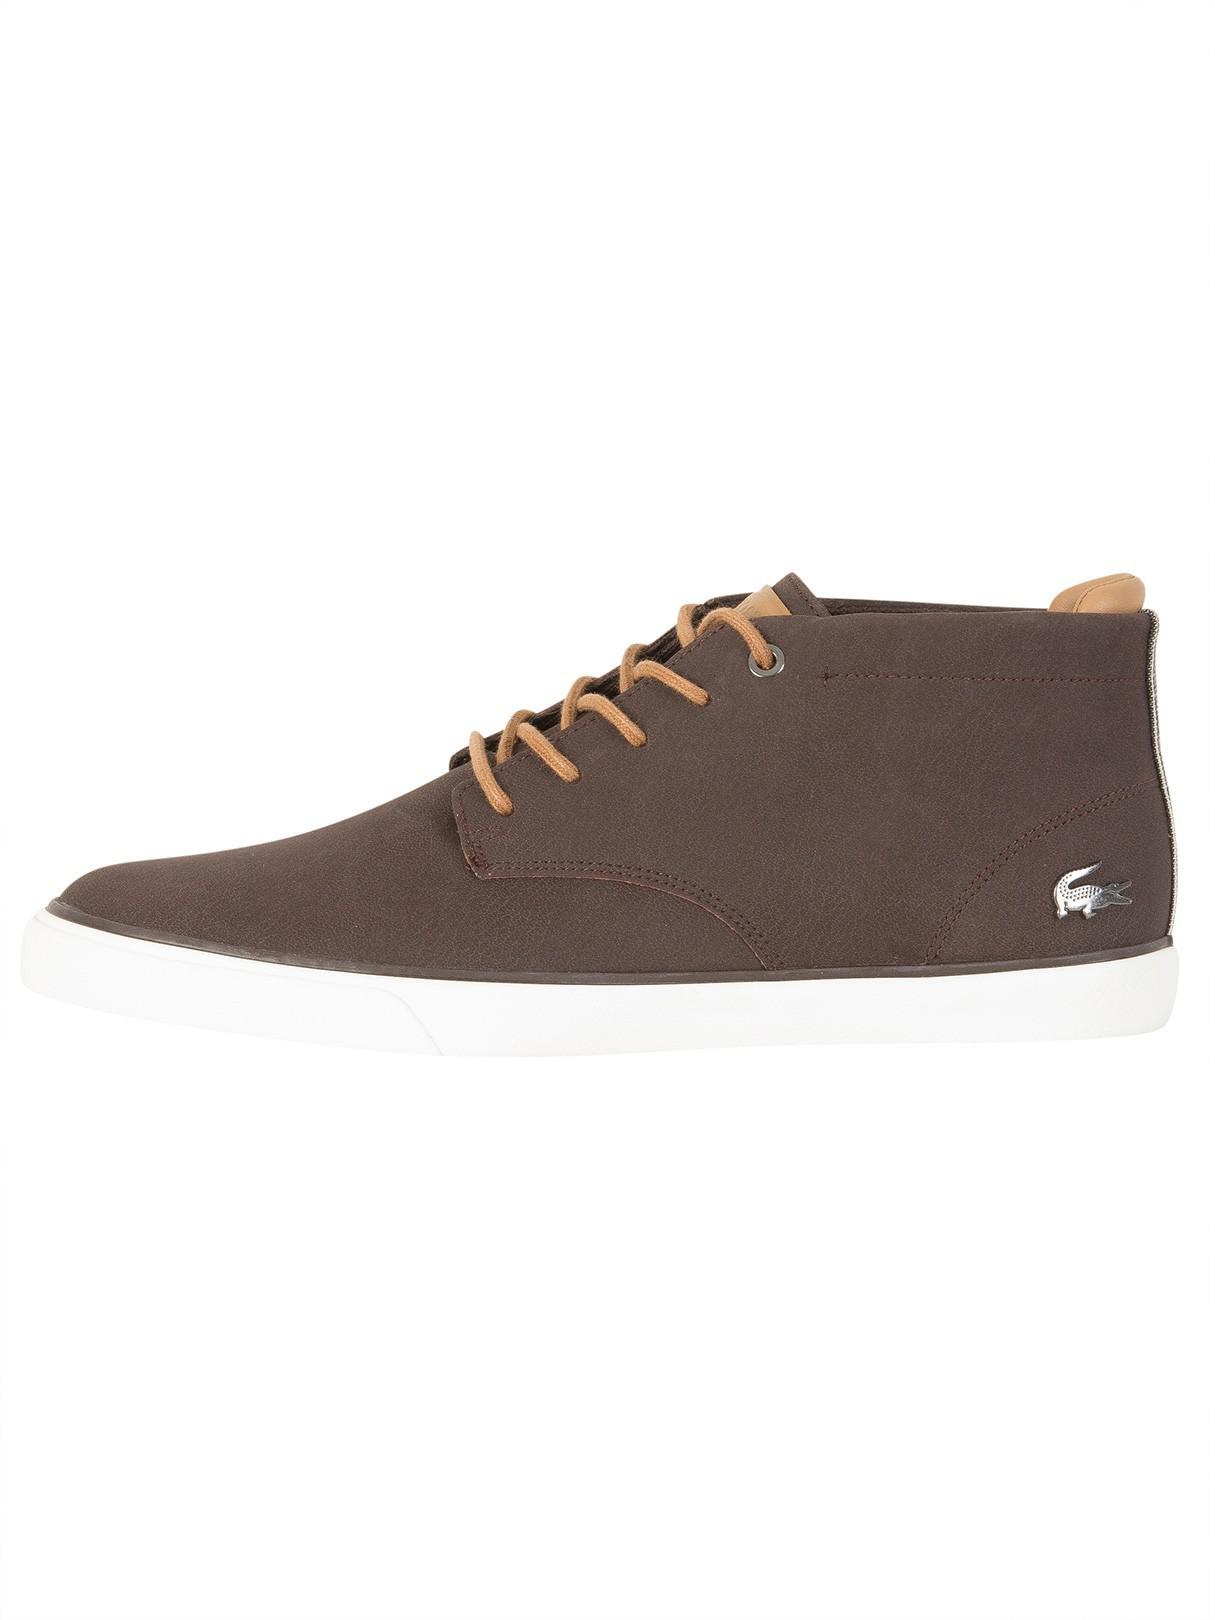 Lacoste Dark Brown/light Brown Esparre Chukka 118 1 Cam Trainers for Men -  Lyst